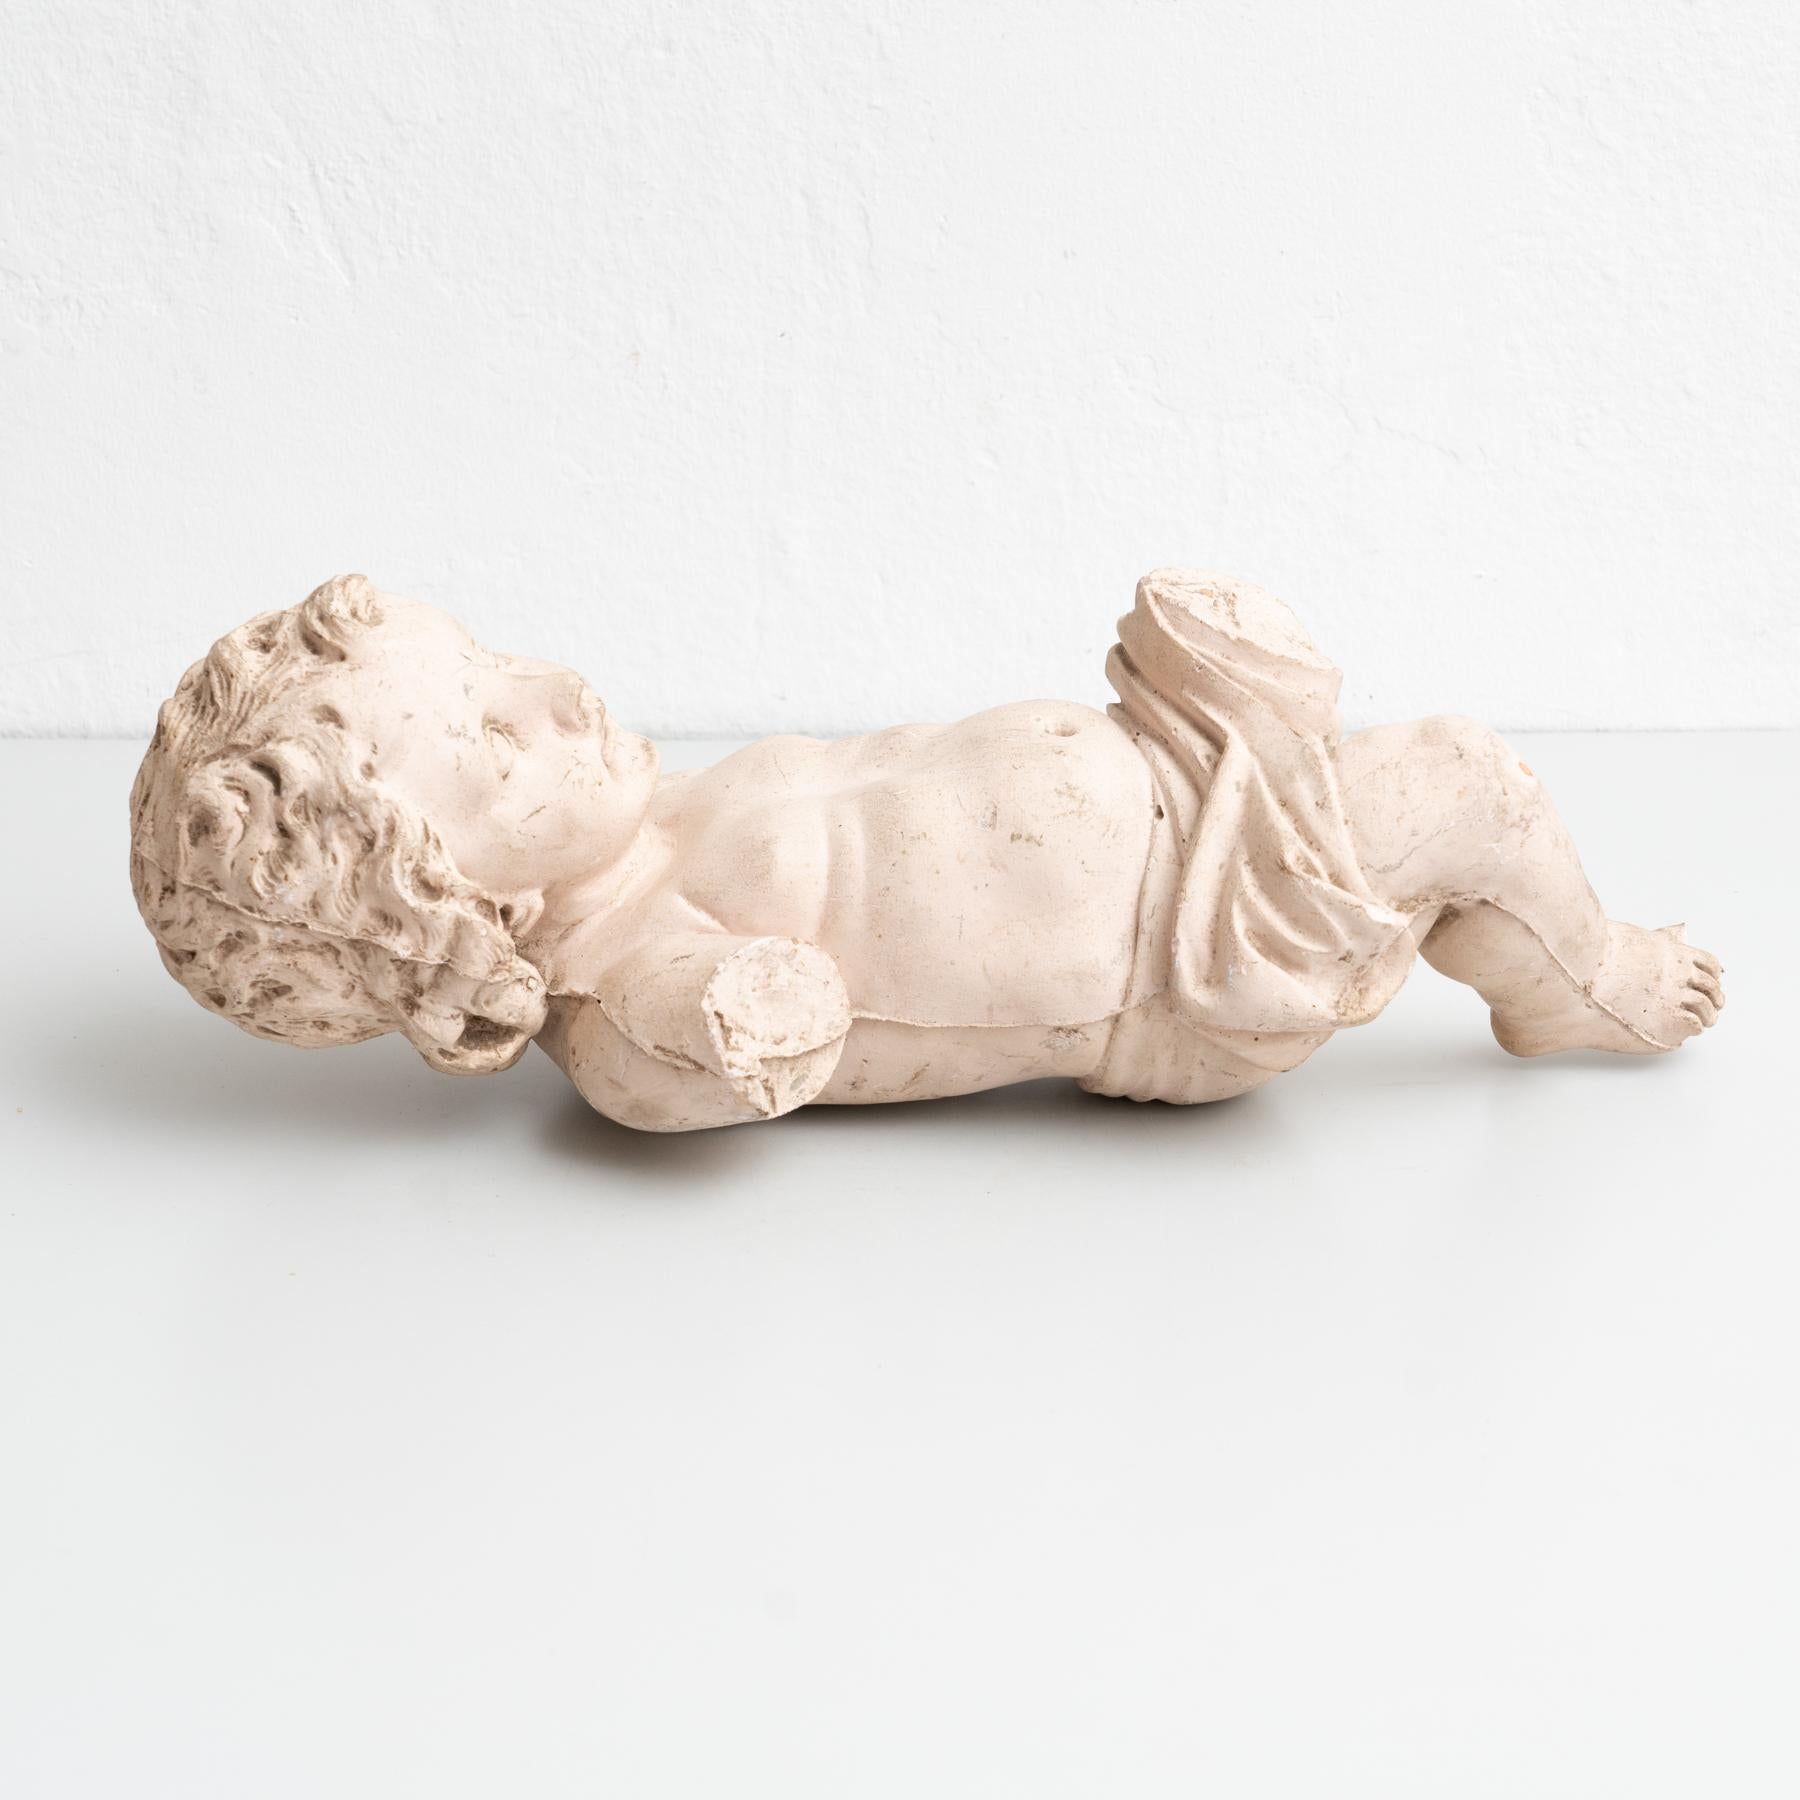 Traditional religious plaster figure of baby Jesus Christ.

Made in traditional Catalan atelier in Olot, Spain, circa 1950.

In original condition, with minor wear consistent with age and use, preserving a beautiful